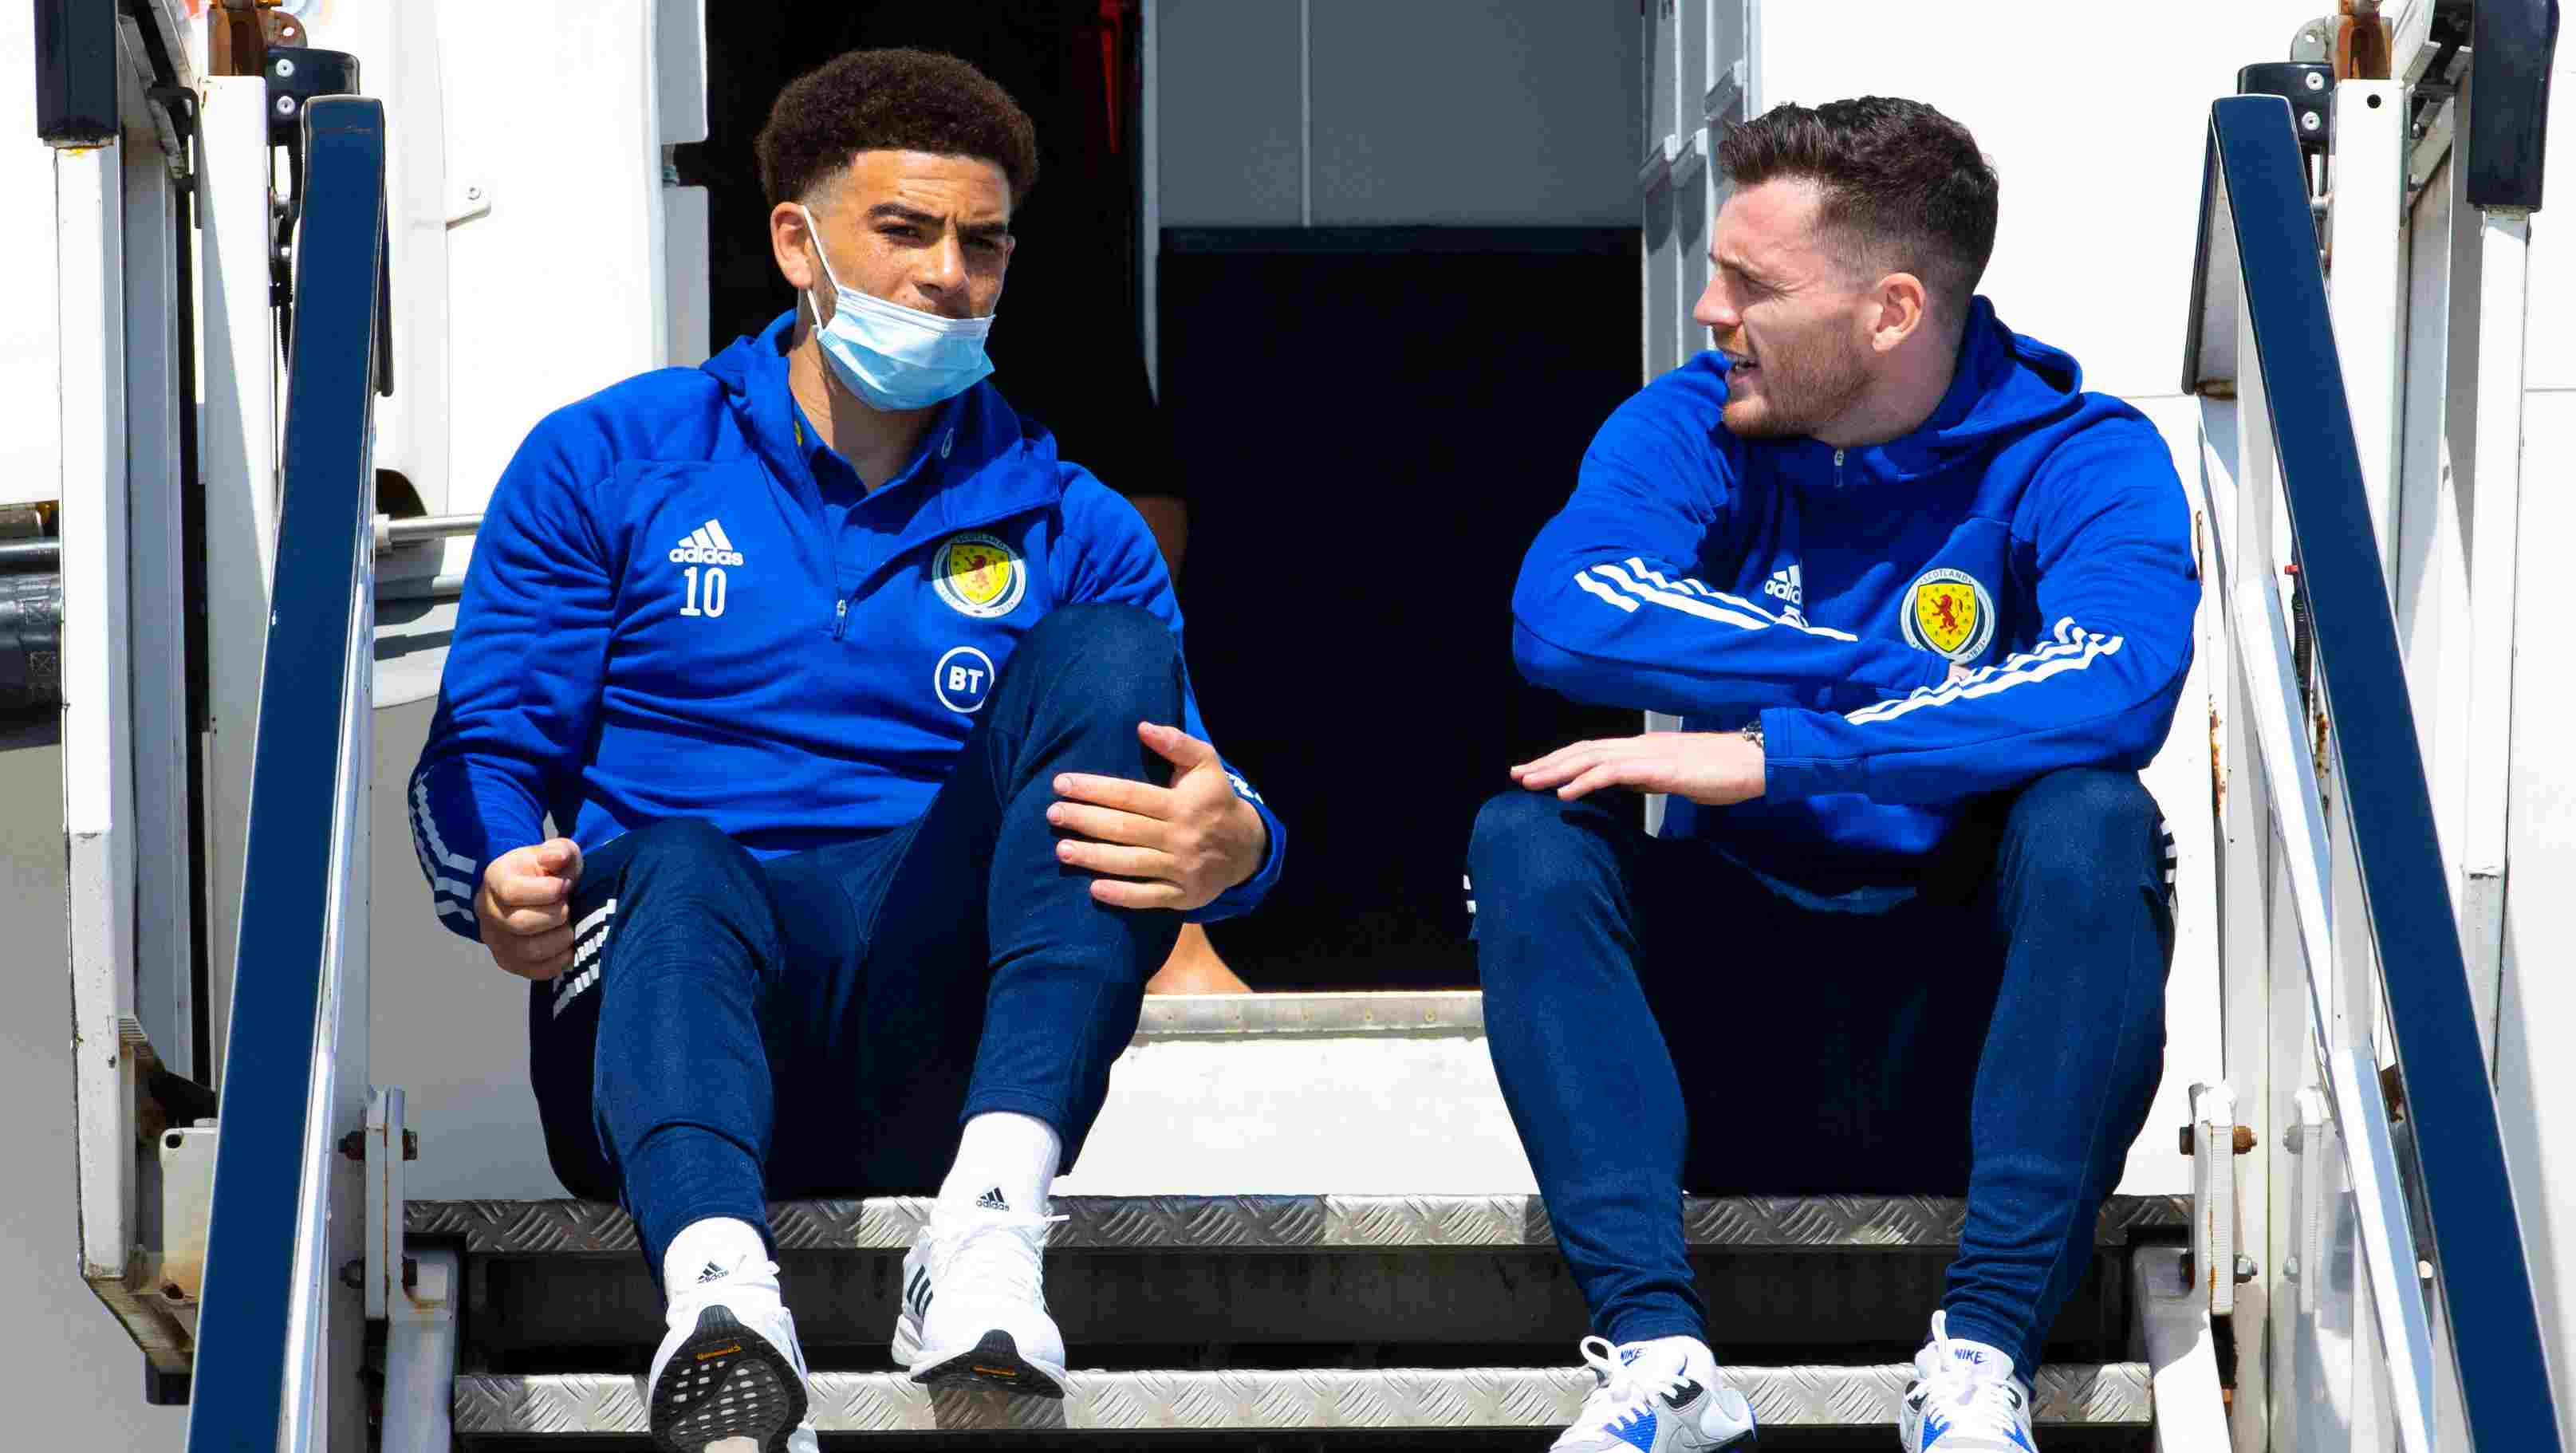 Scotland's Che Adams (L) and Andy Robertson are pictured as Scotland depart for Spain for a training camp ahead of EURO 2020 from Glasgow Airport, on May 27, 2021, in Glasgow, Scotland.  (Photo by Alan Harvey / SNS Group)